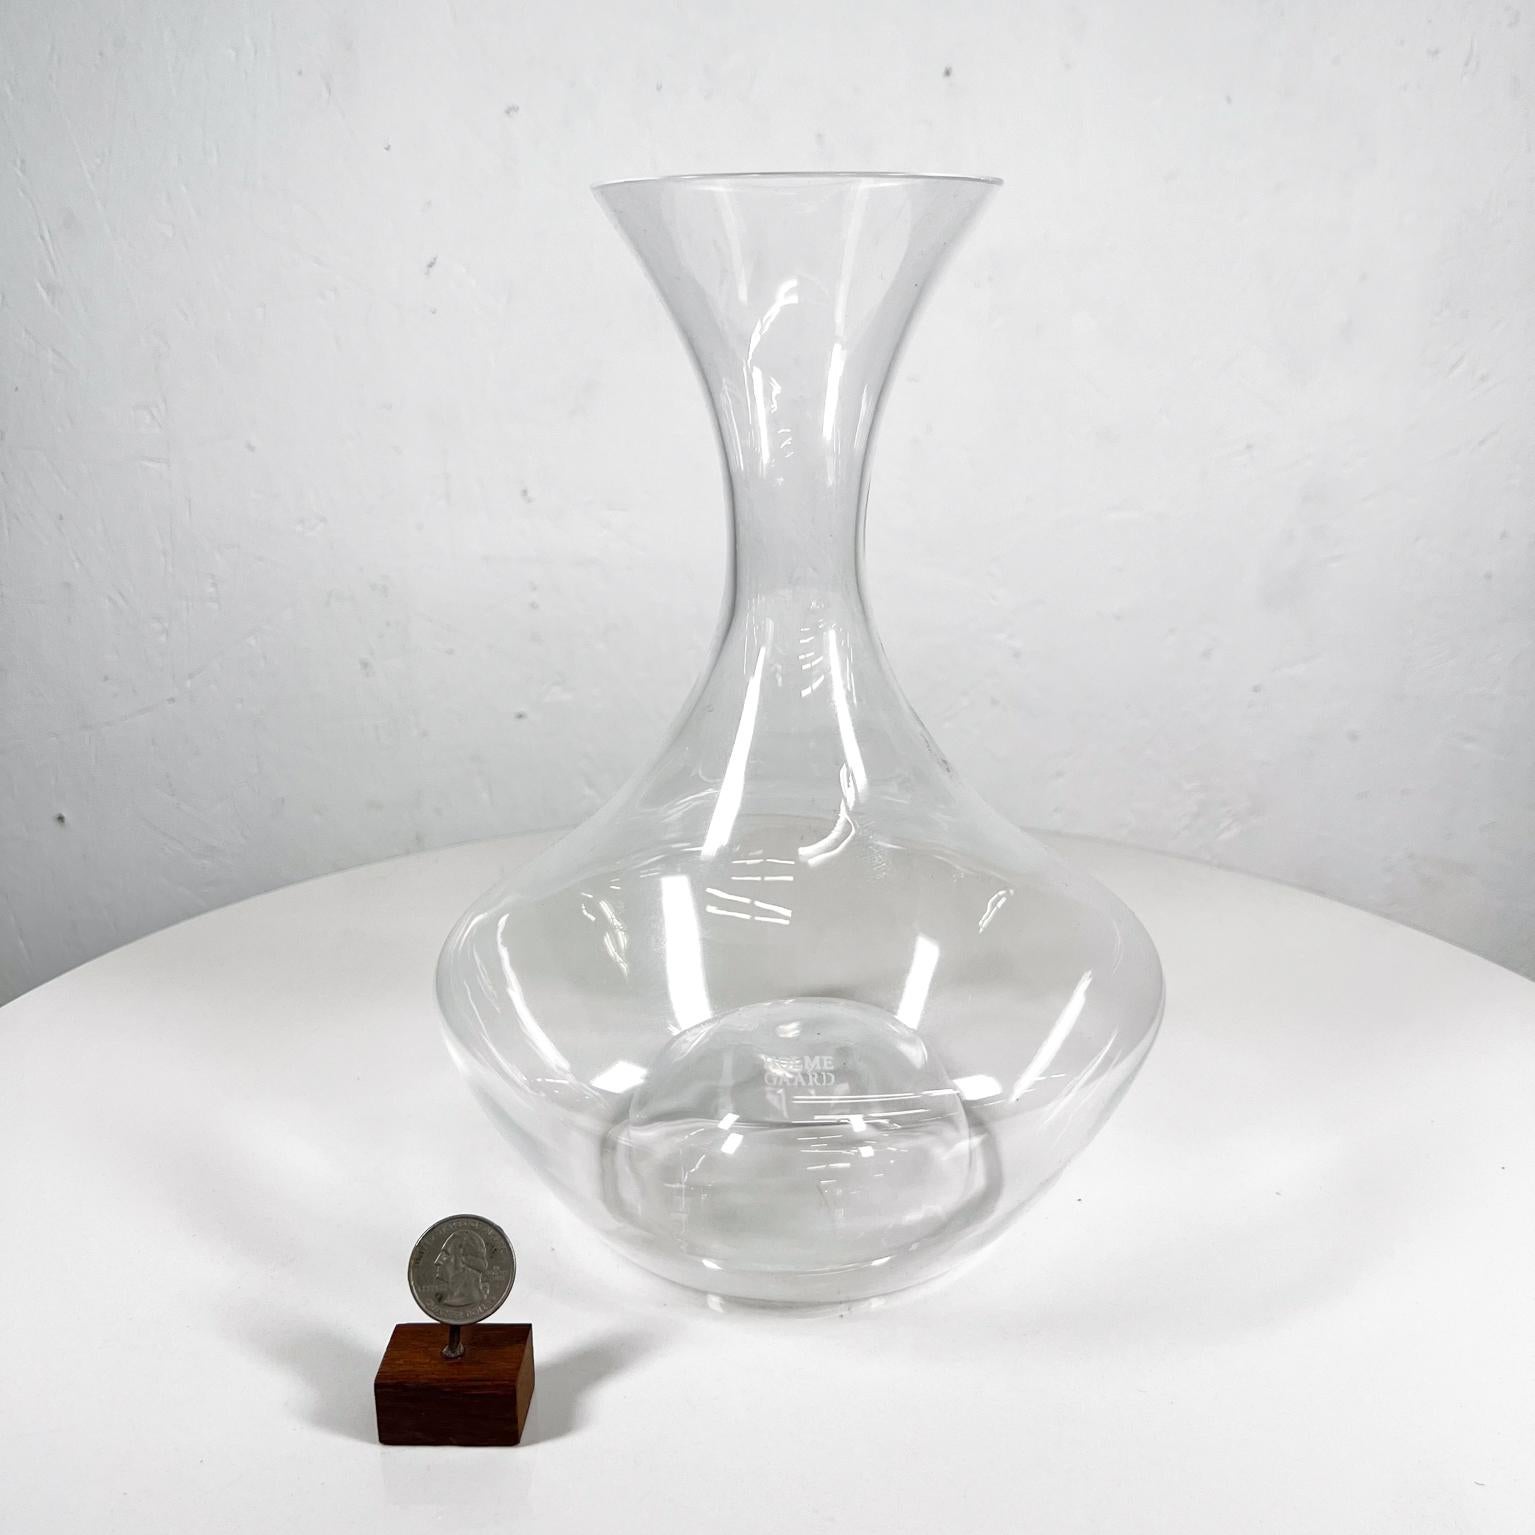 Perfection Wine Carafe Glass Decanter
8 diameter x 10.75 H.
By Tom Nybroe for Holmegaard
Signed
Preowned condition
See images provided.